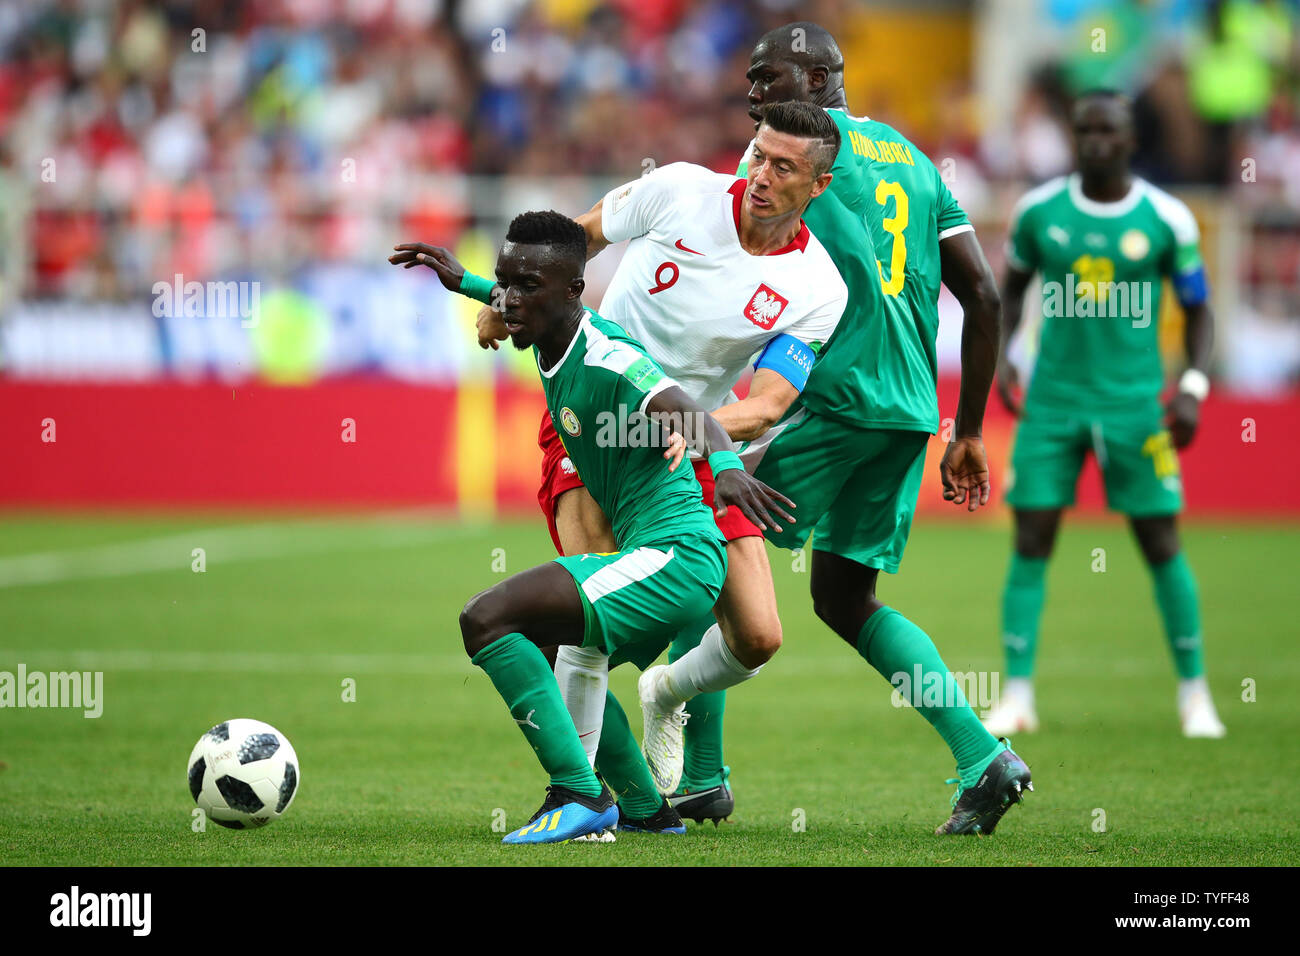 Robert Lewandowski of Poland (C) in action with Idrissa Gana Gueye (L) of Senegal during the 2018 FIFA World Cup Group H match at the Spartak Stadium in Moscow, Russia on June 19, 2018. Photo by Chris Brunskill/UPI Stock Photo